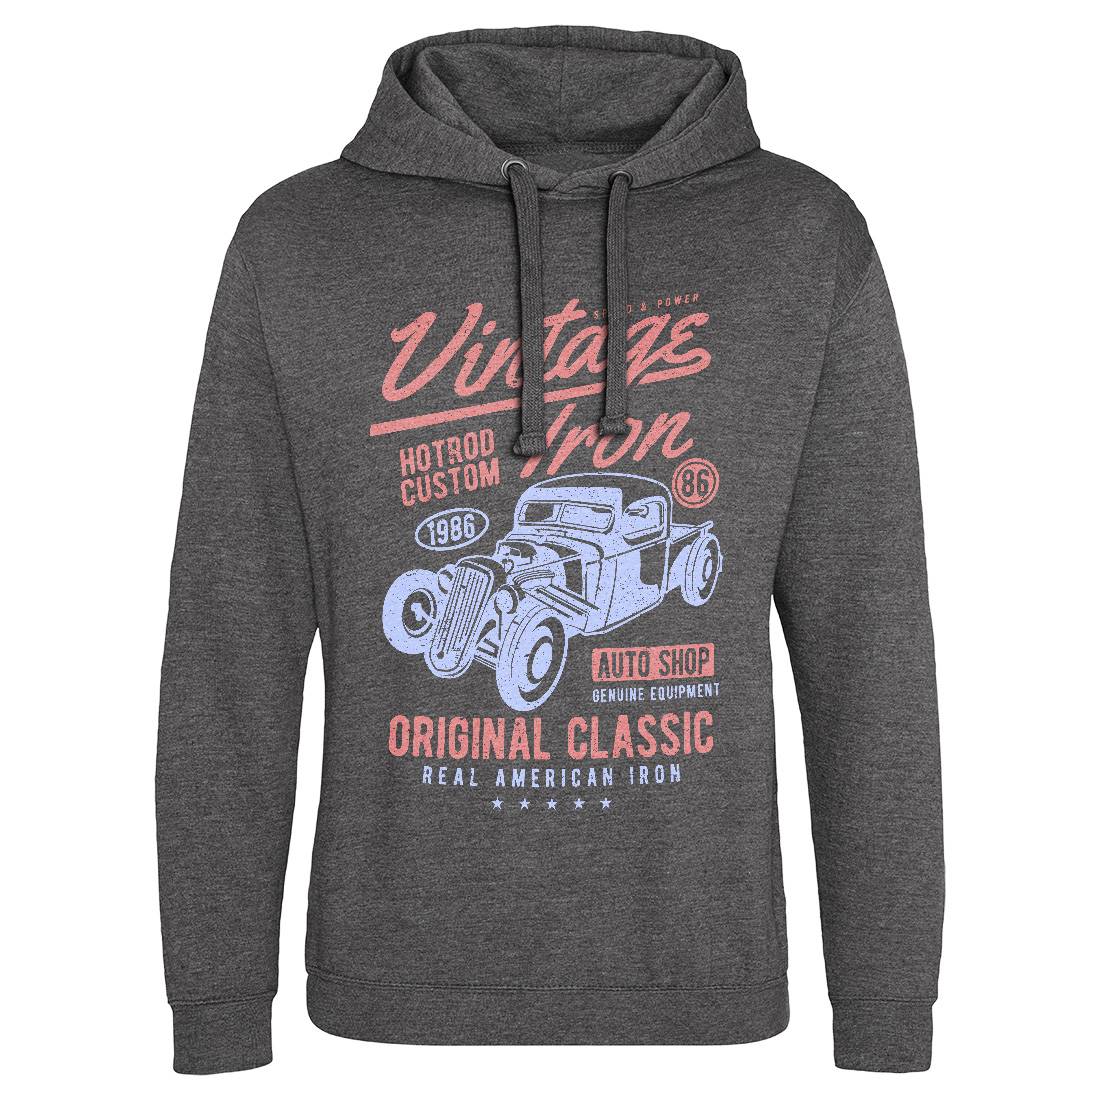 Vintage Iron Mens Hoodie Without Pocket Cars A192